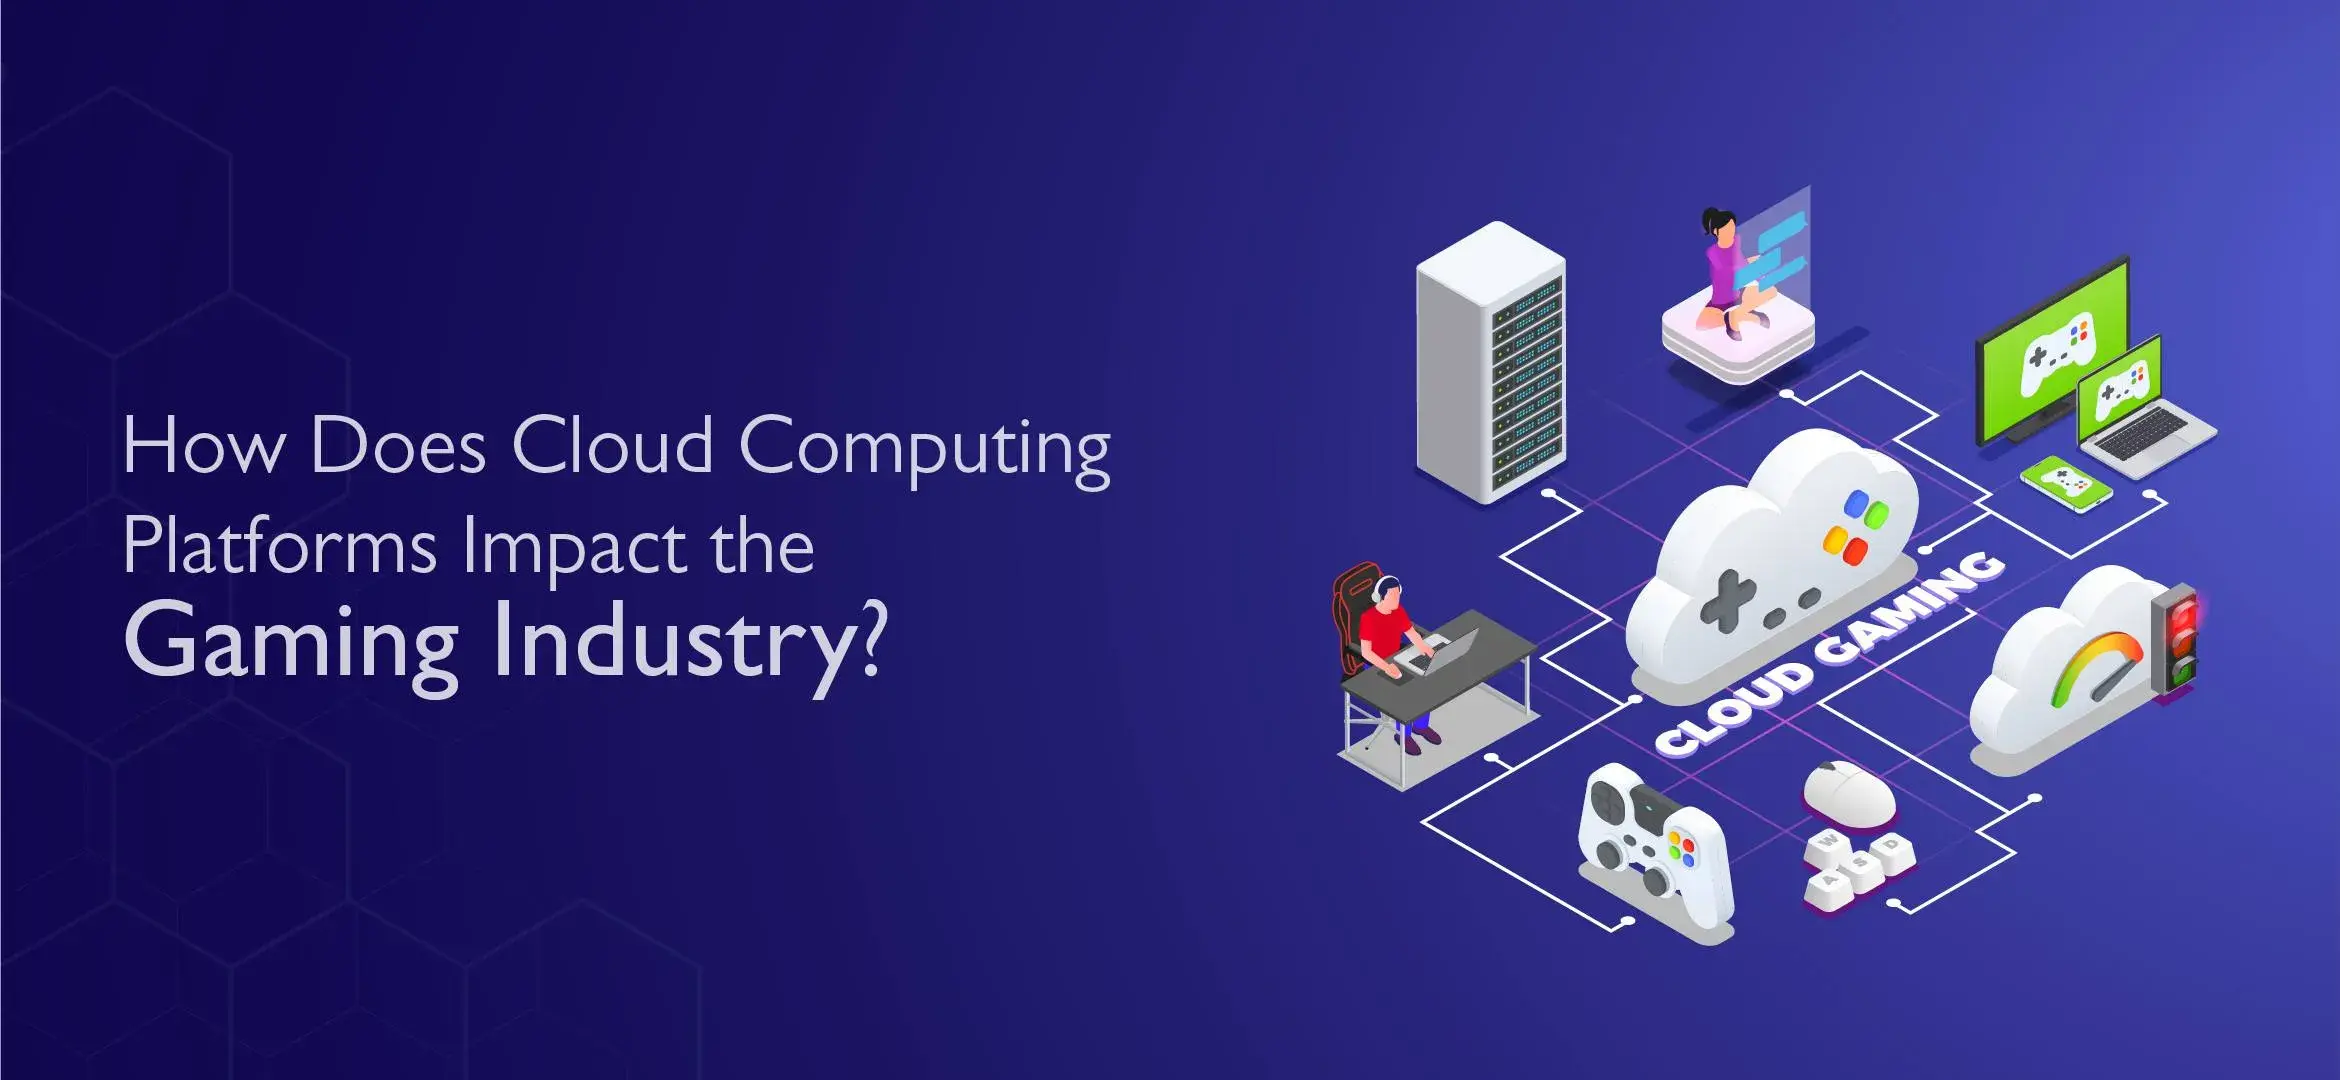 How Does Cloud Computing Platforms Impact the Gaming Industry?